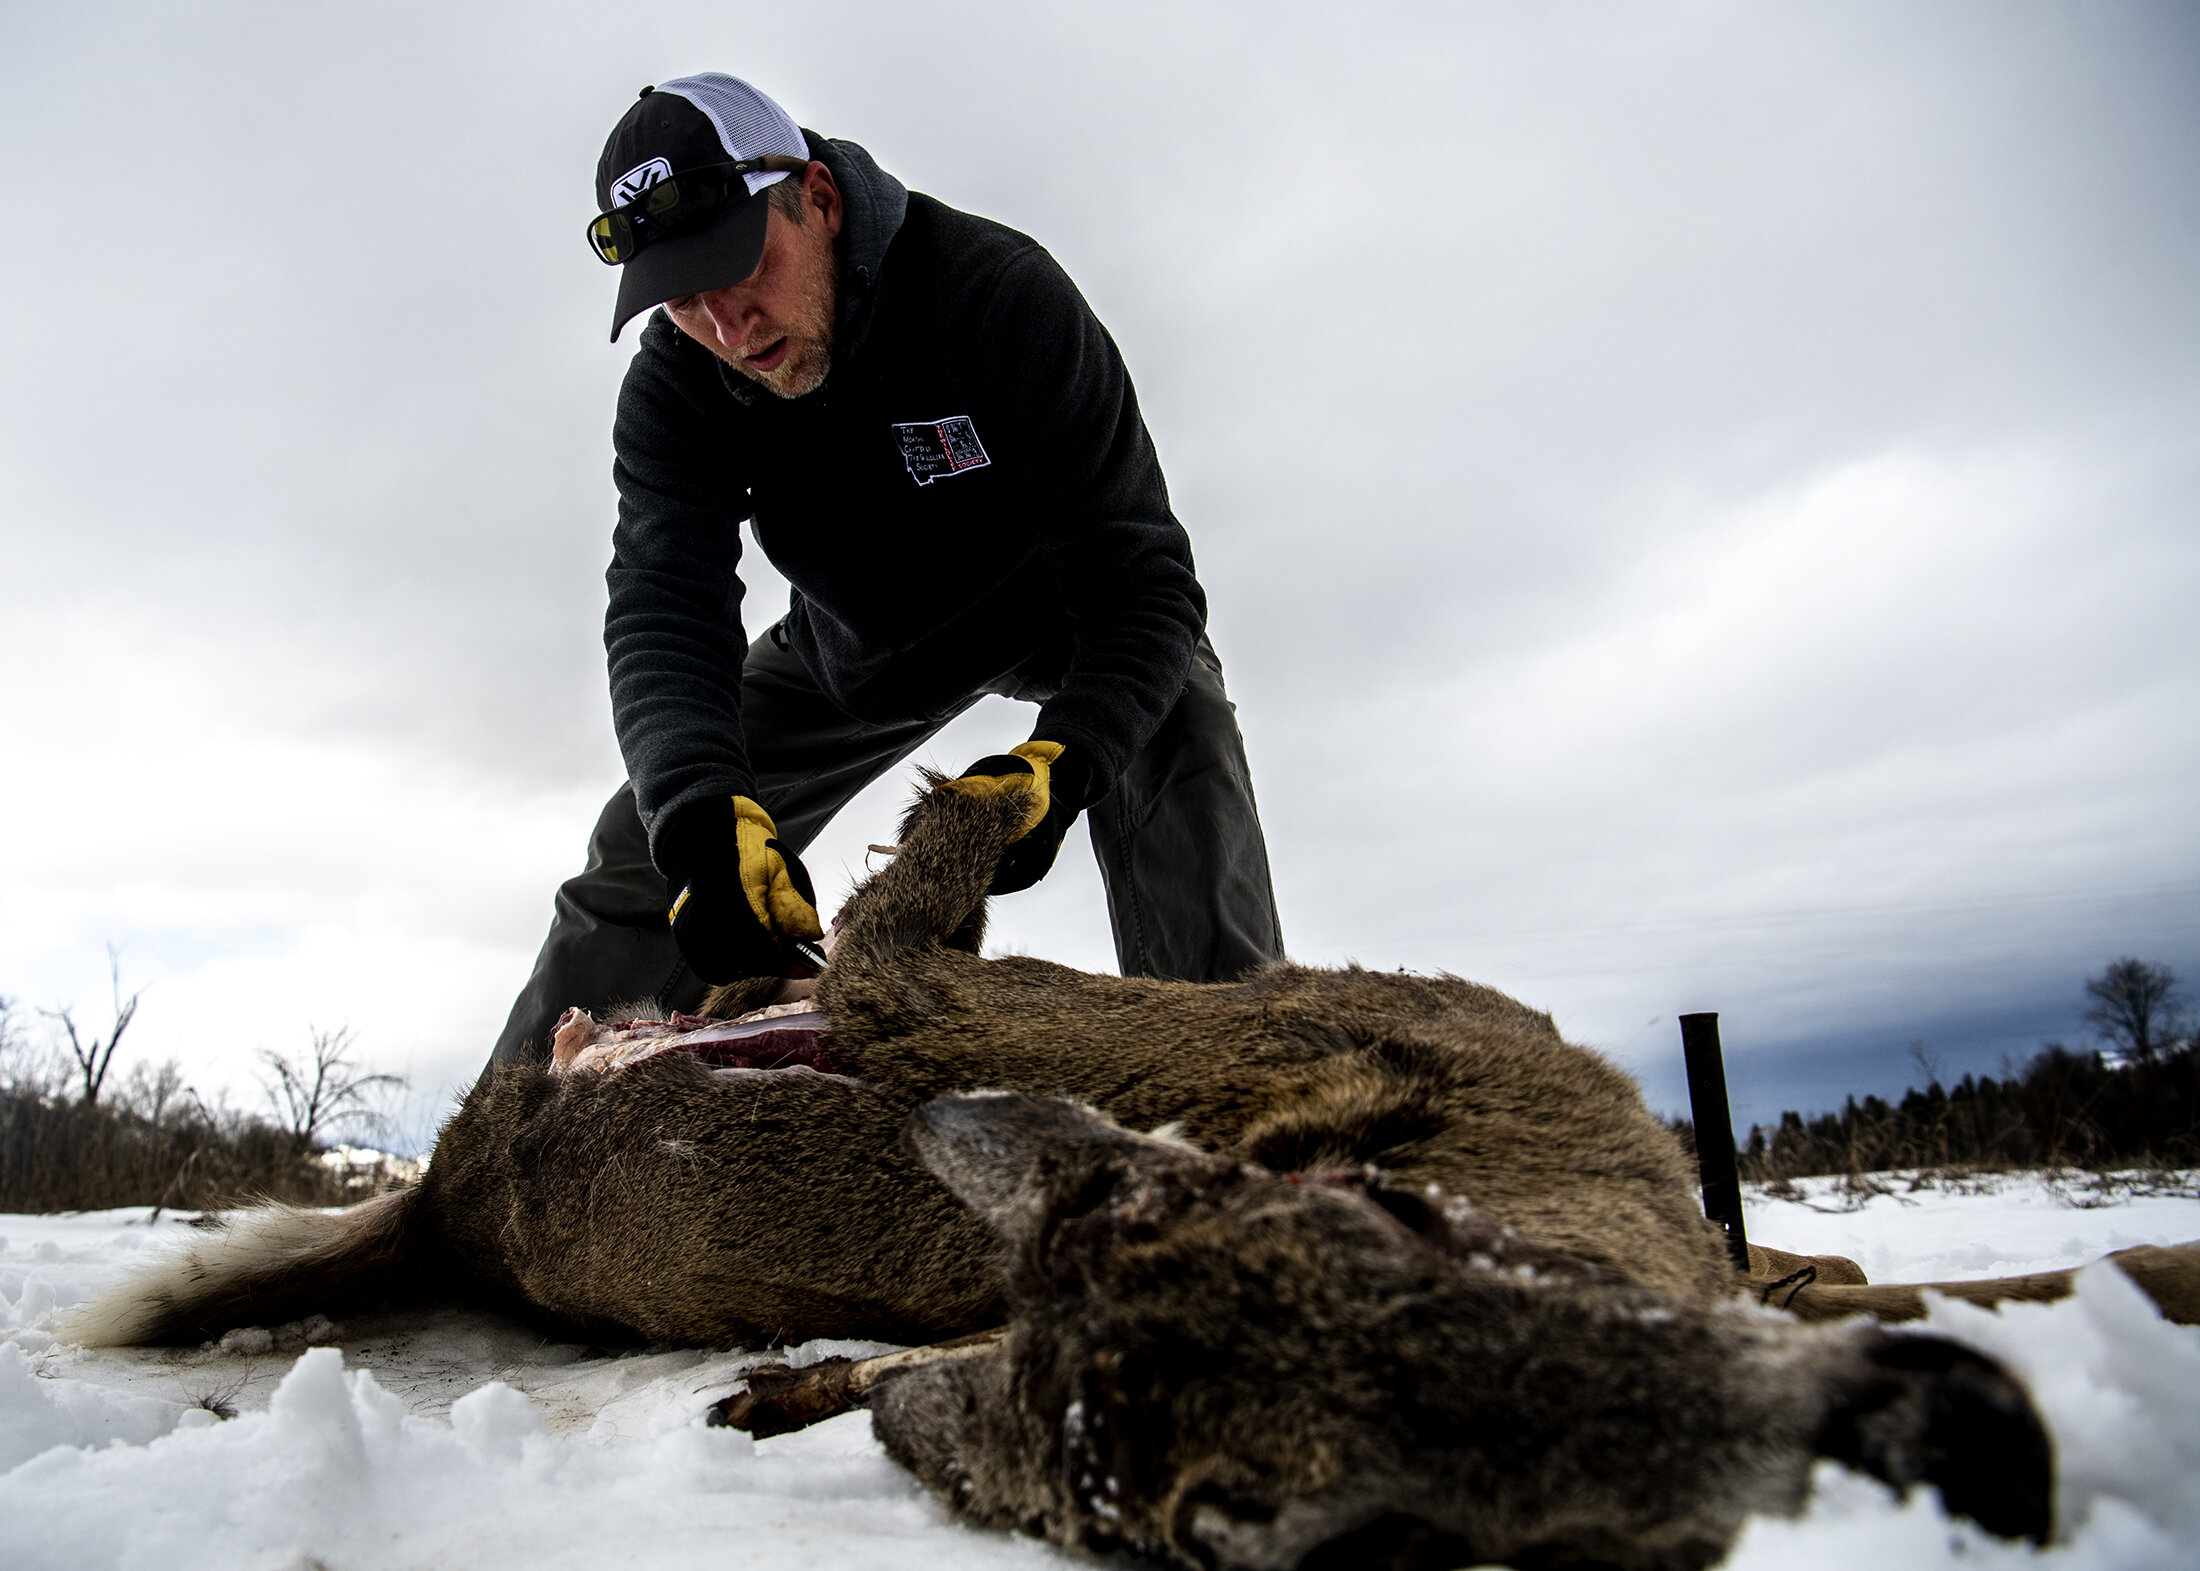  Eric Rasmussen cuts into a deer carcass that will be used as bait to observe raptors, Tuesday, Feb. 11, 2020 in Florence, Mont. Rasmussen works for Raptor View Research Institute, studying elevated levels of lead in birds of prey.  